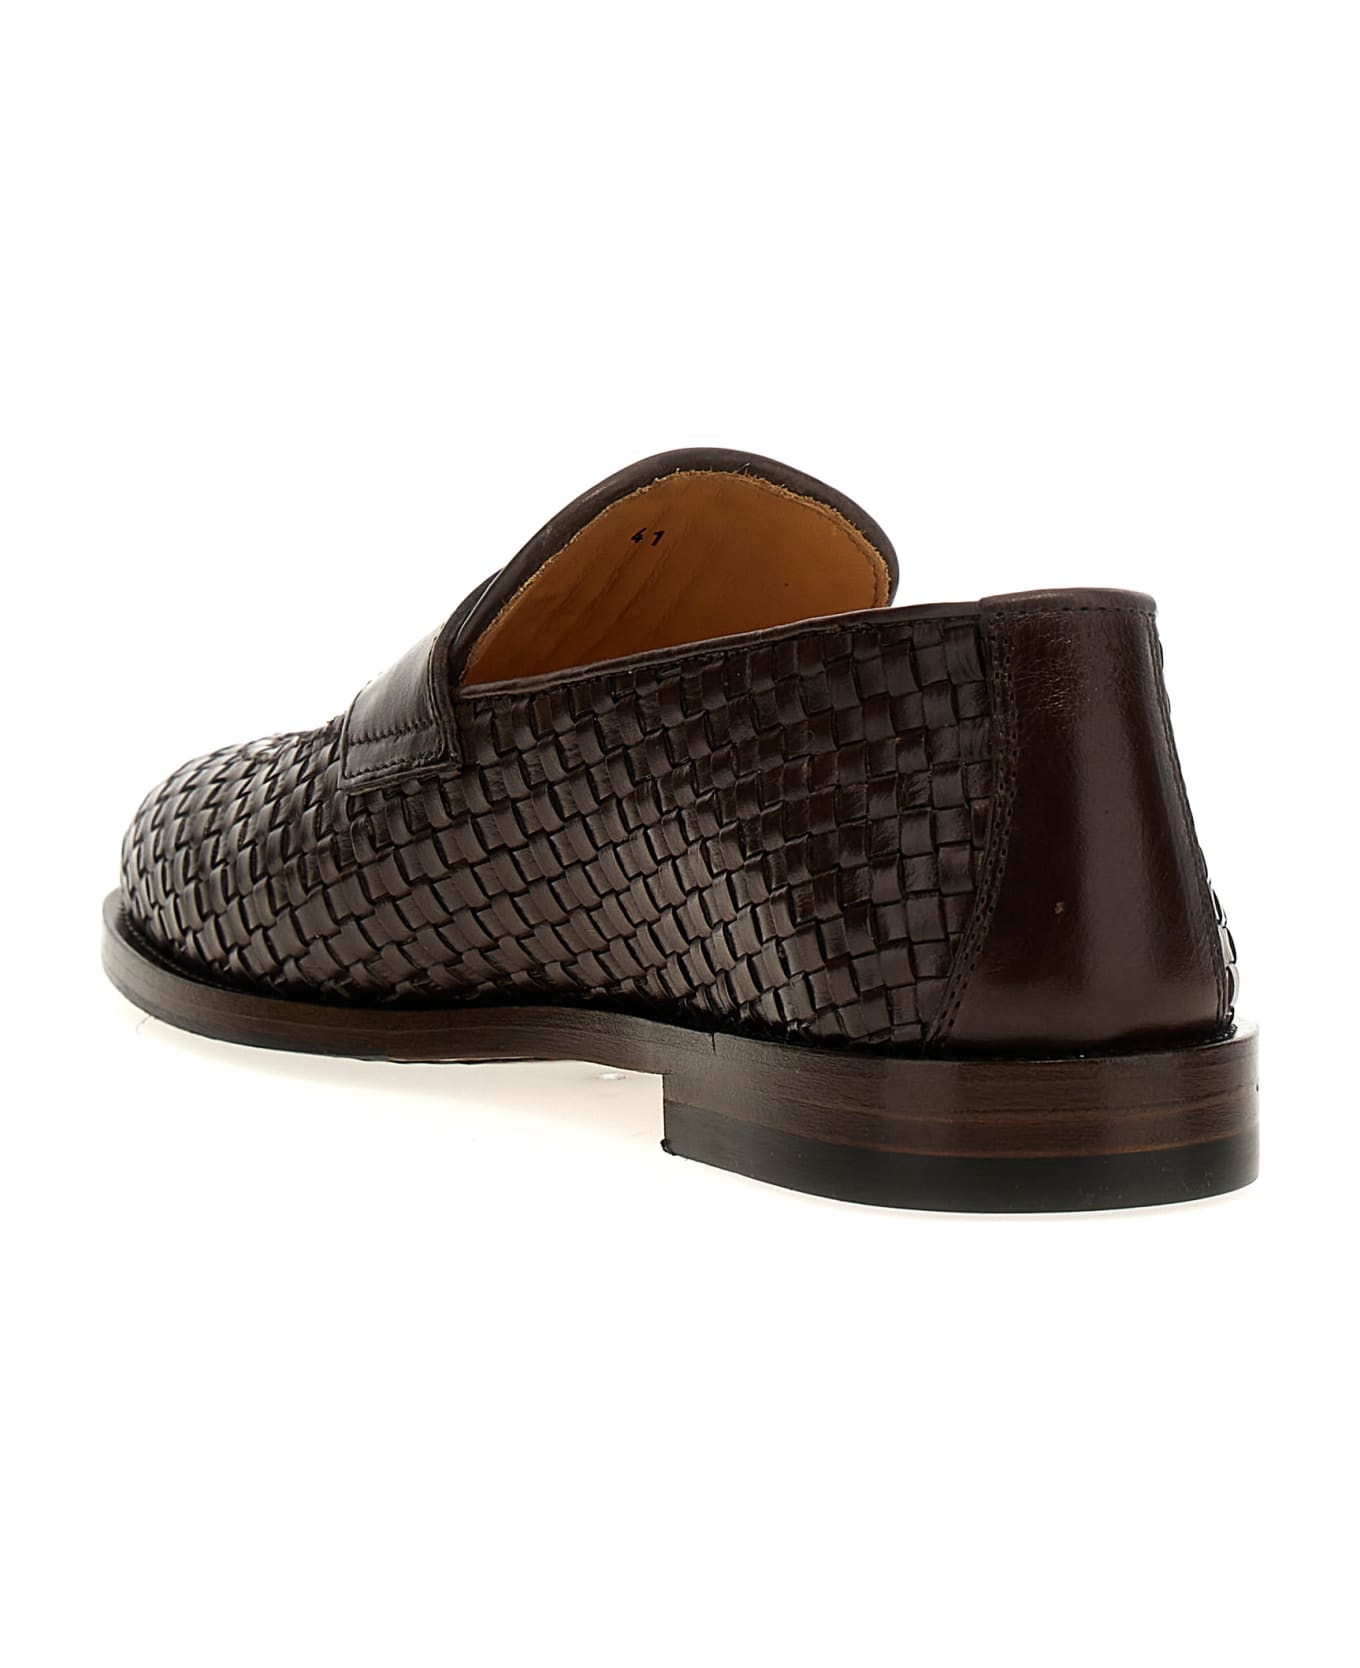 Brunello Cucinelli Braided Leather Loafers - Brown ローファー＆デッキシューズ